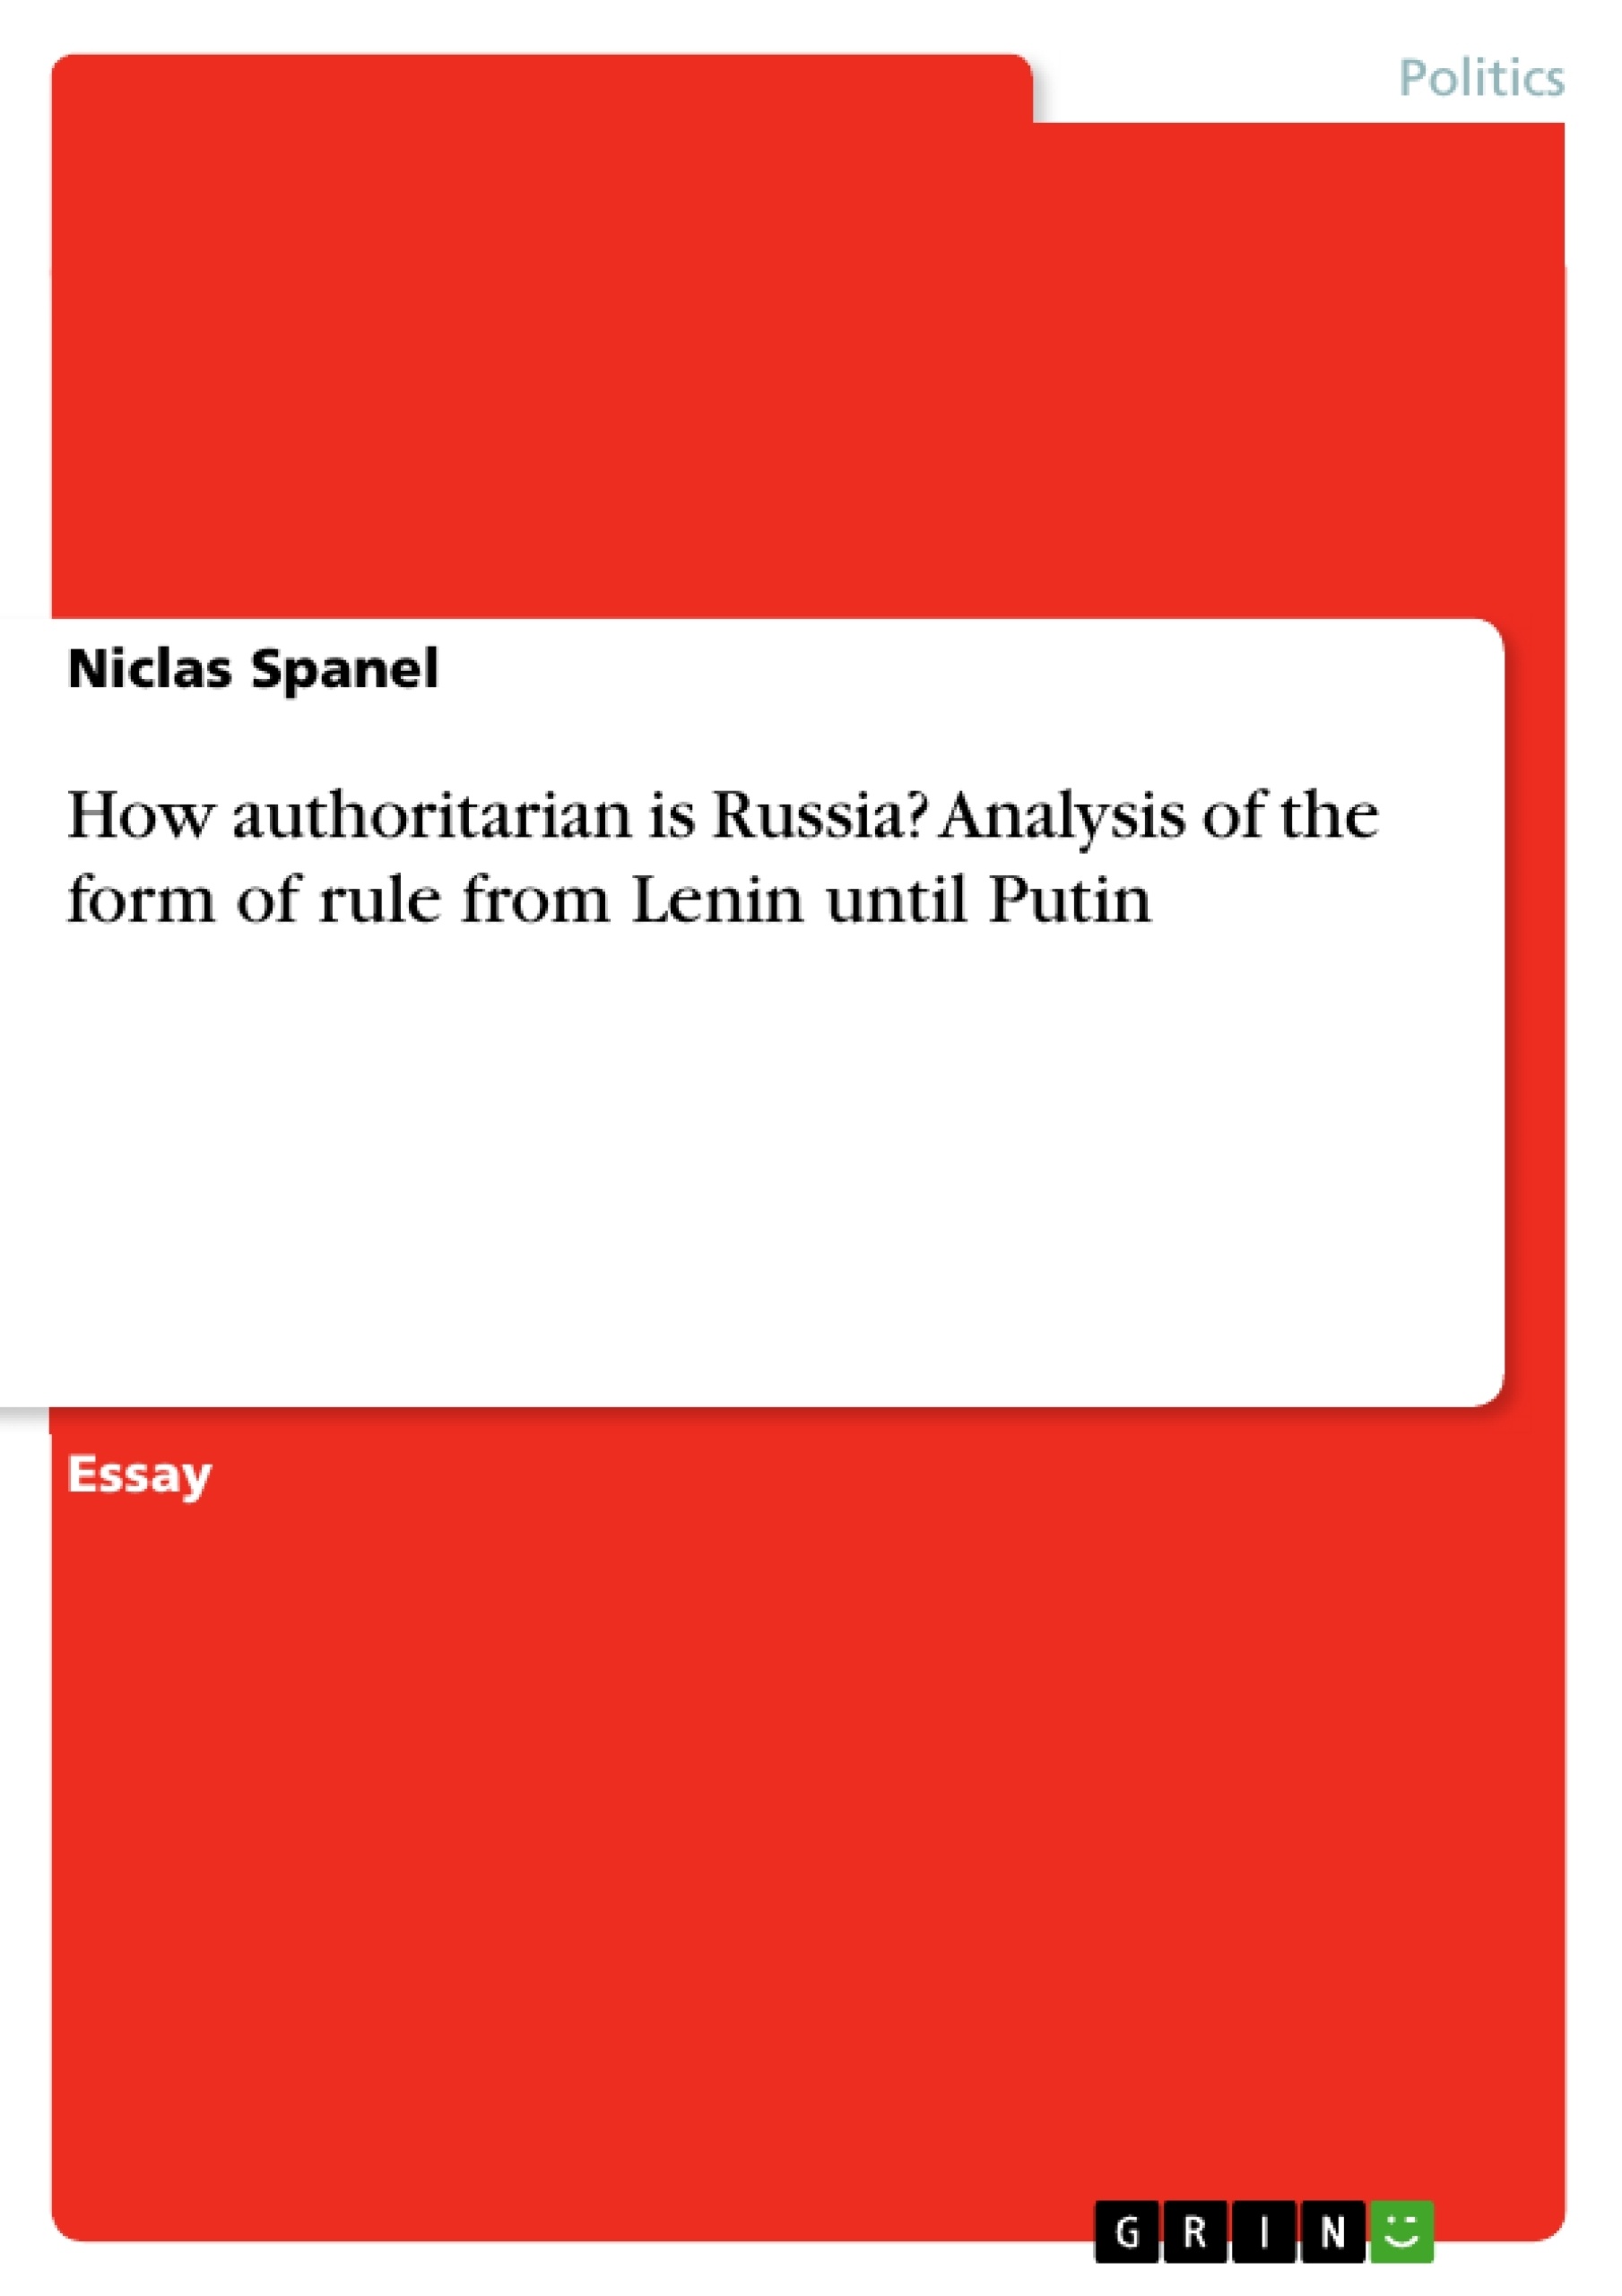 Title: How authoritarian is Russia? Analysis of the form of rule from Lenin until Putin